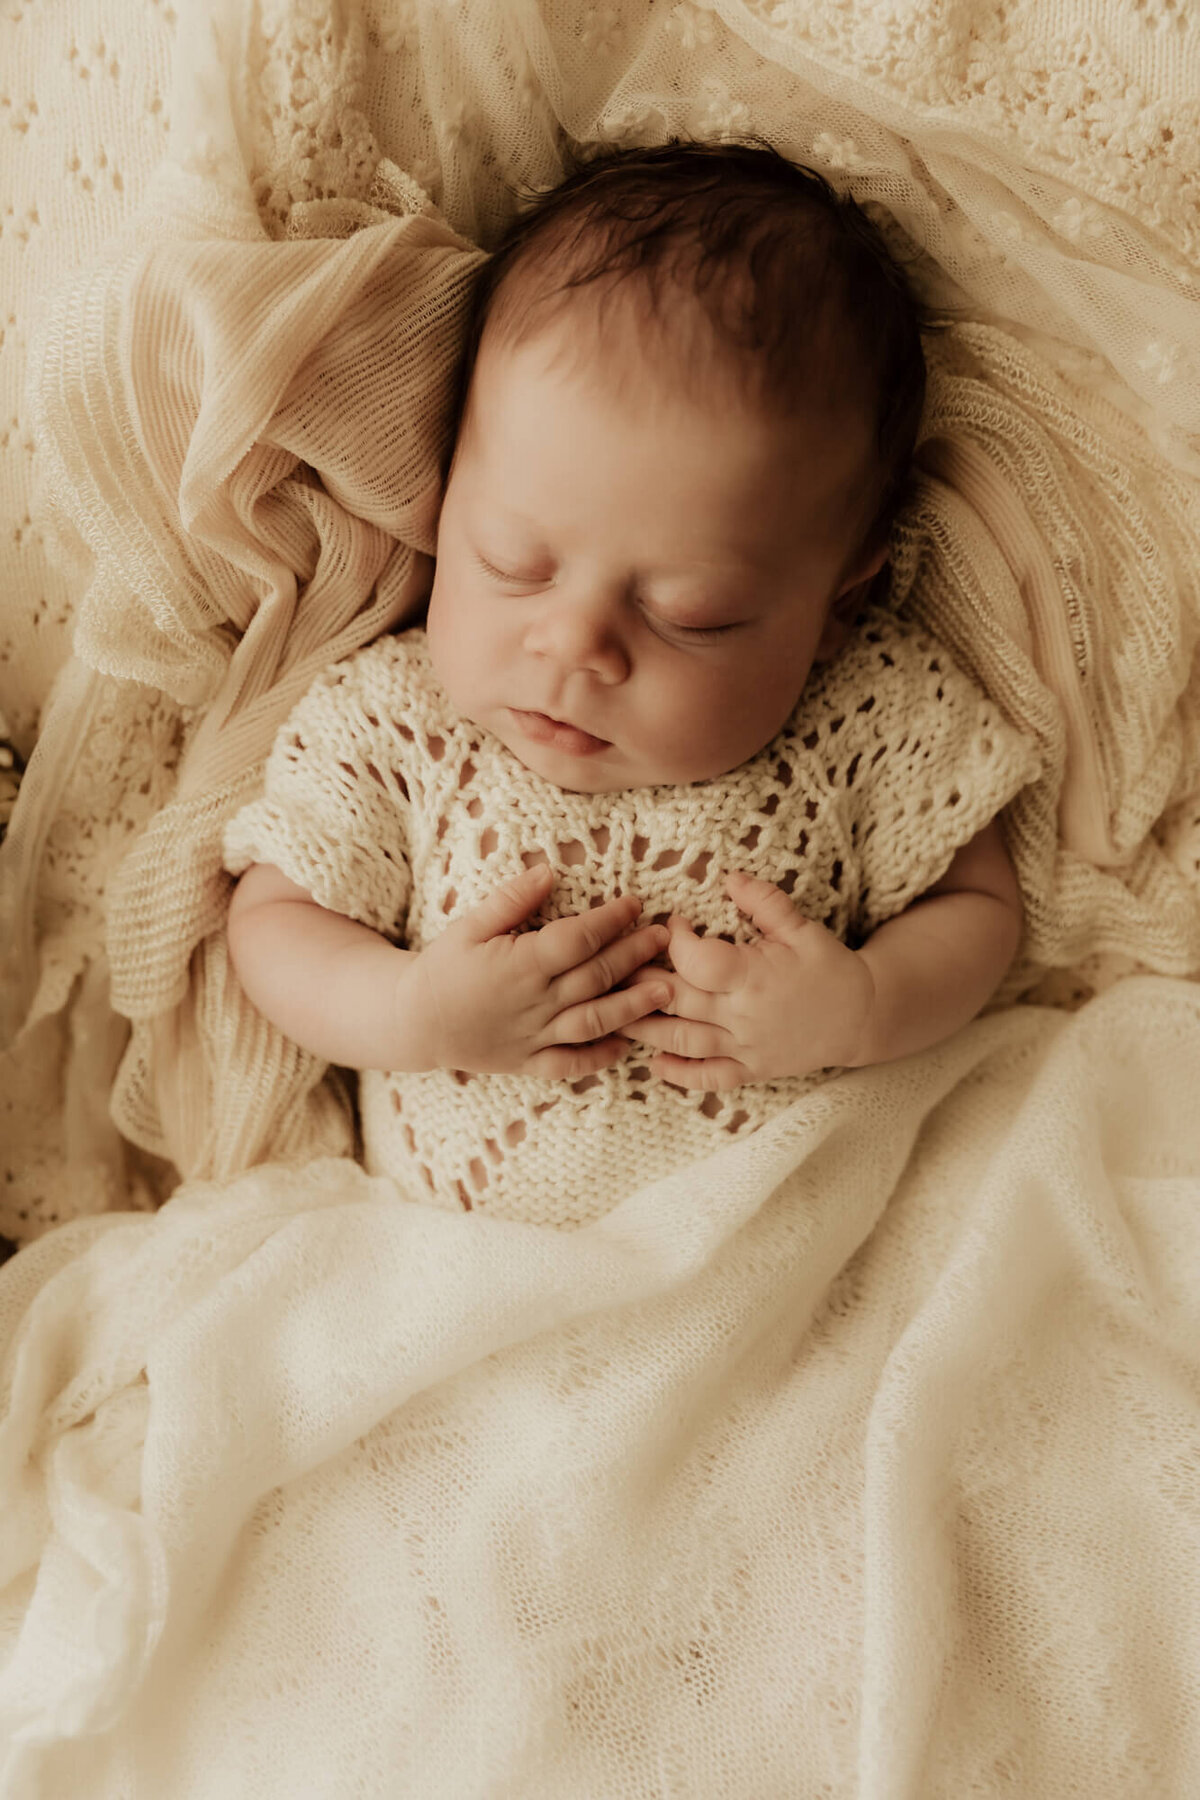 Baby girl sleeping in a basket with a cream colored blanket.